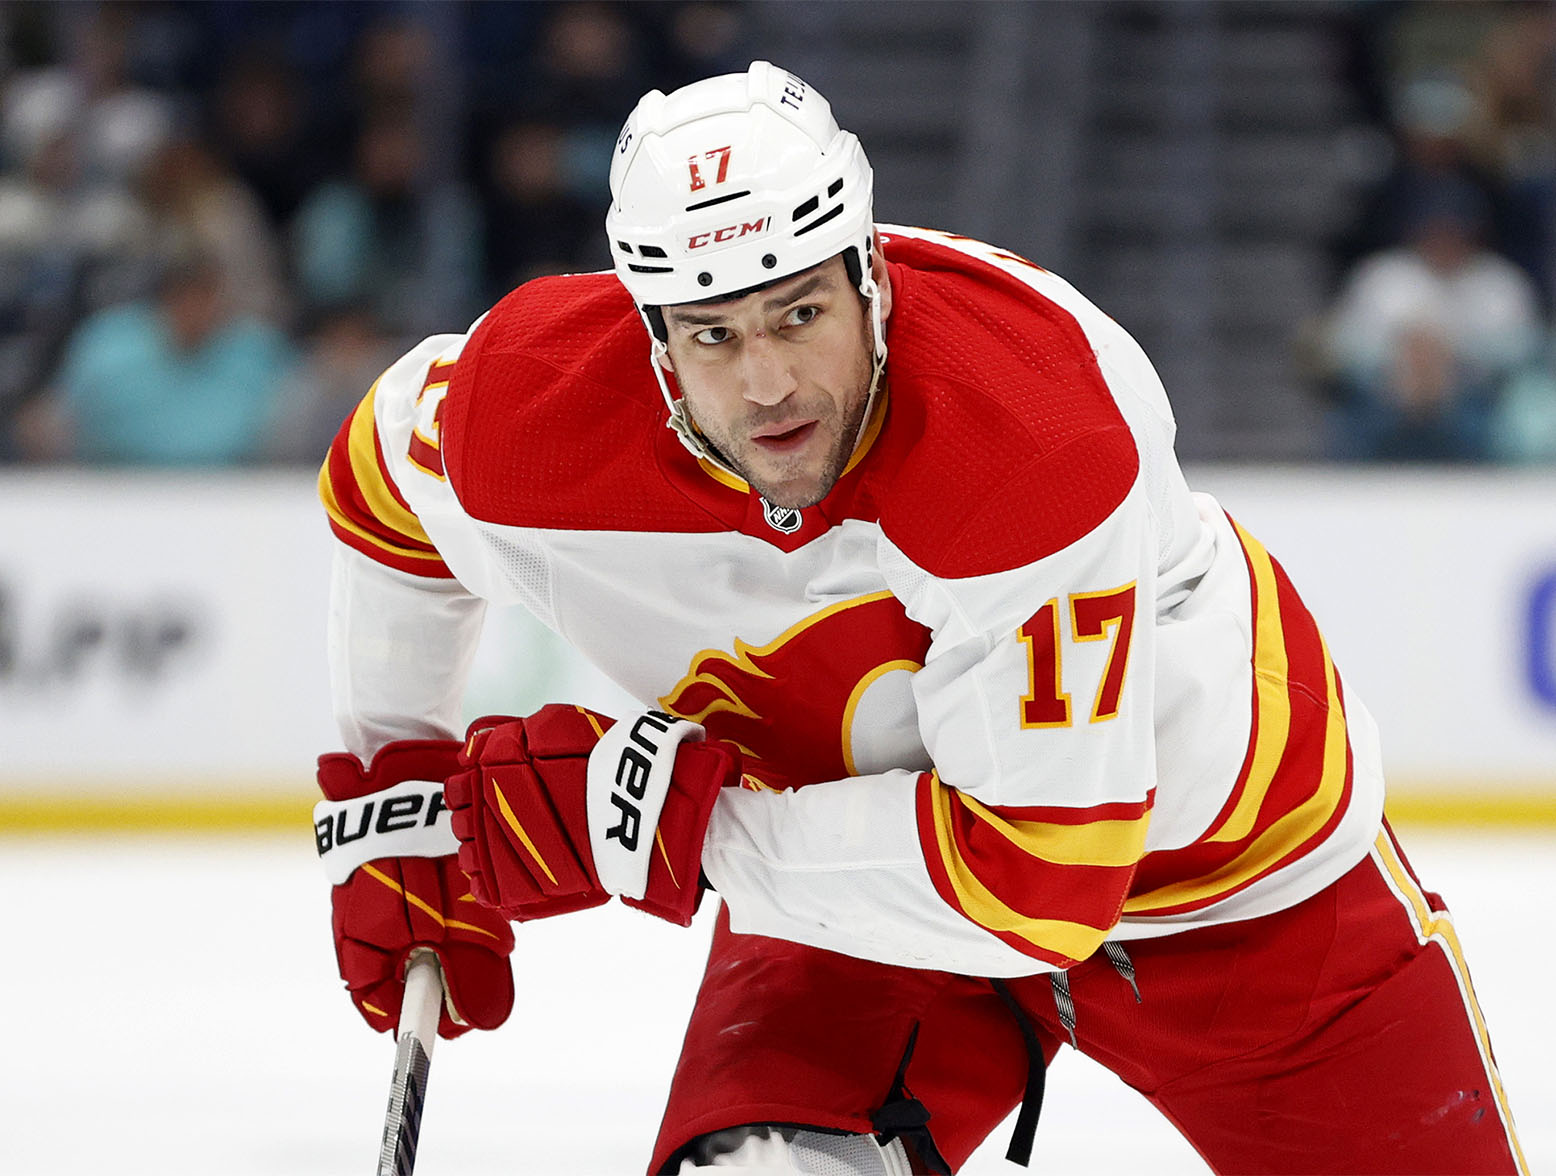 SEATTLE, WASHINGTON - DECEMBER 28: Milan Lucic #17 of the Calgary Flames skates against the Seattle Kraken during the first period at Climate Pledge Arena on December 28, 2022 in Seattle, Washington. (Photo by Steph Chambers/Getty Images)